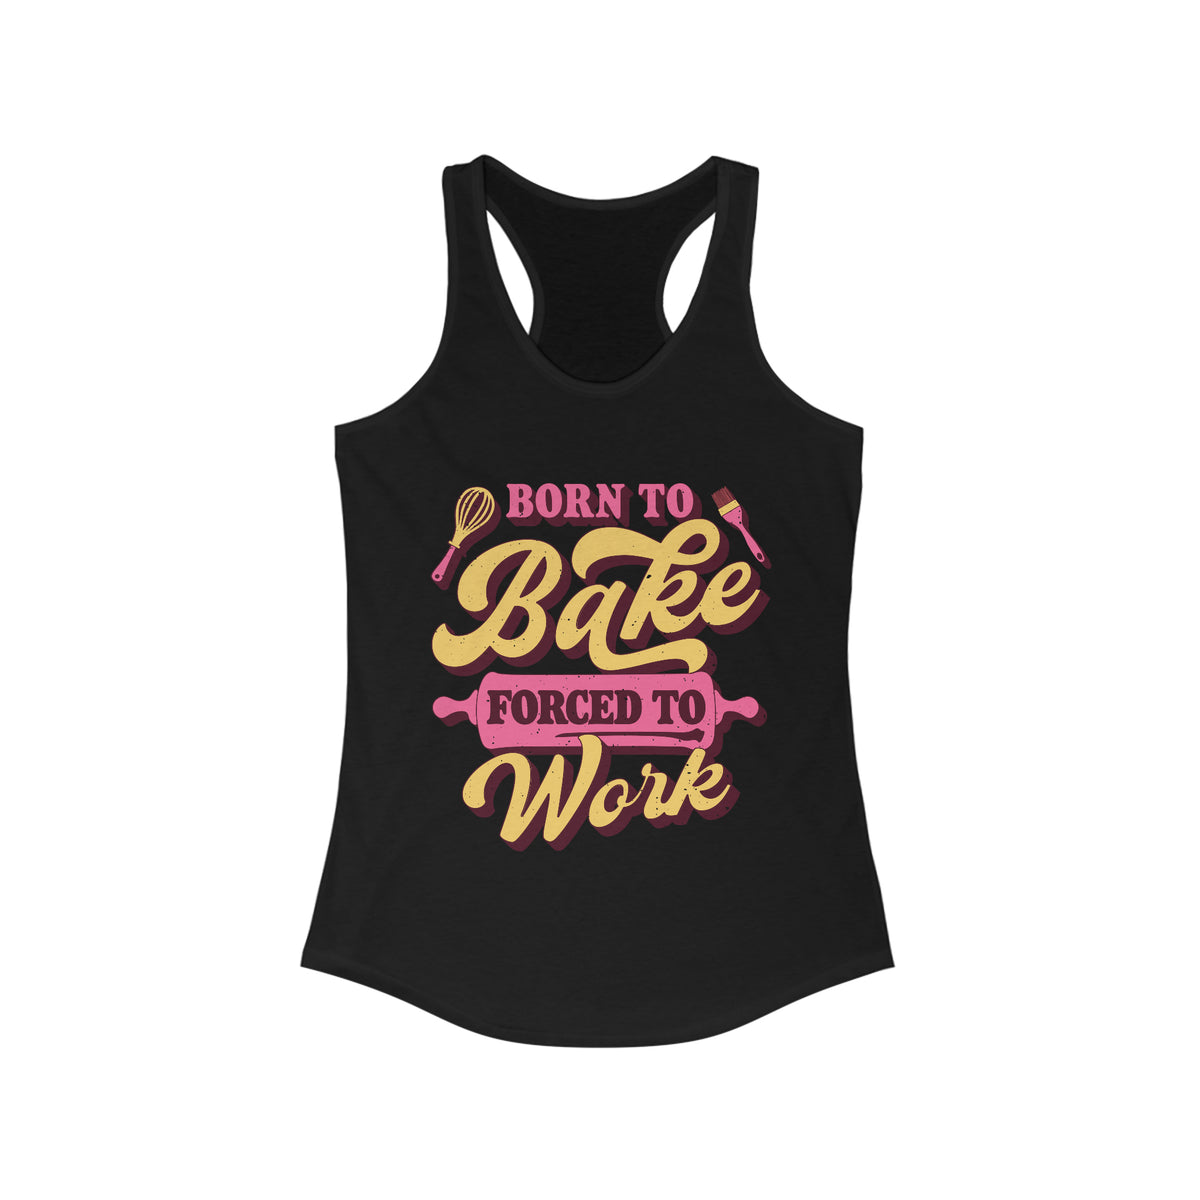 Born To Bake Funny Baking Shirt | Forced To Work Gift For Baker | Women's Slim-Fit Racerback Tank Top